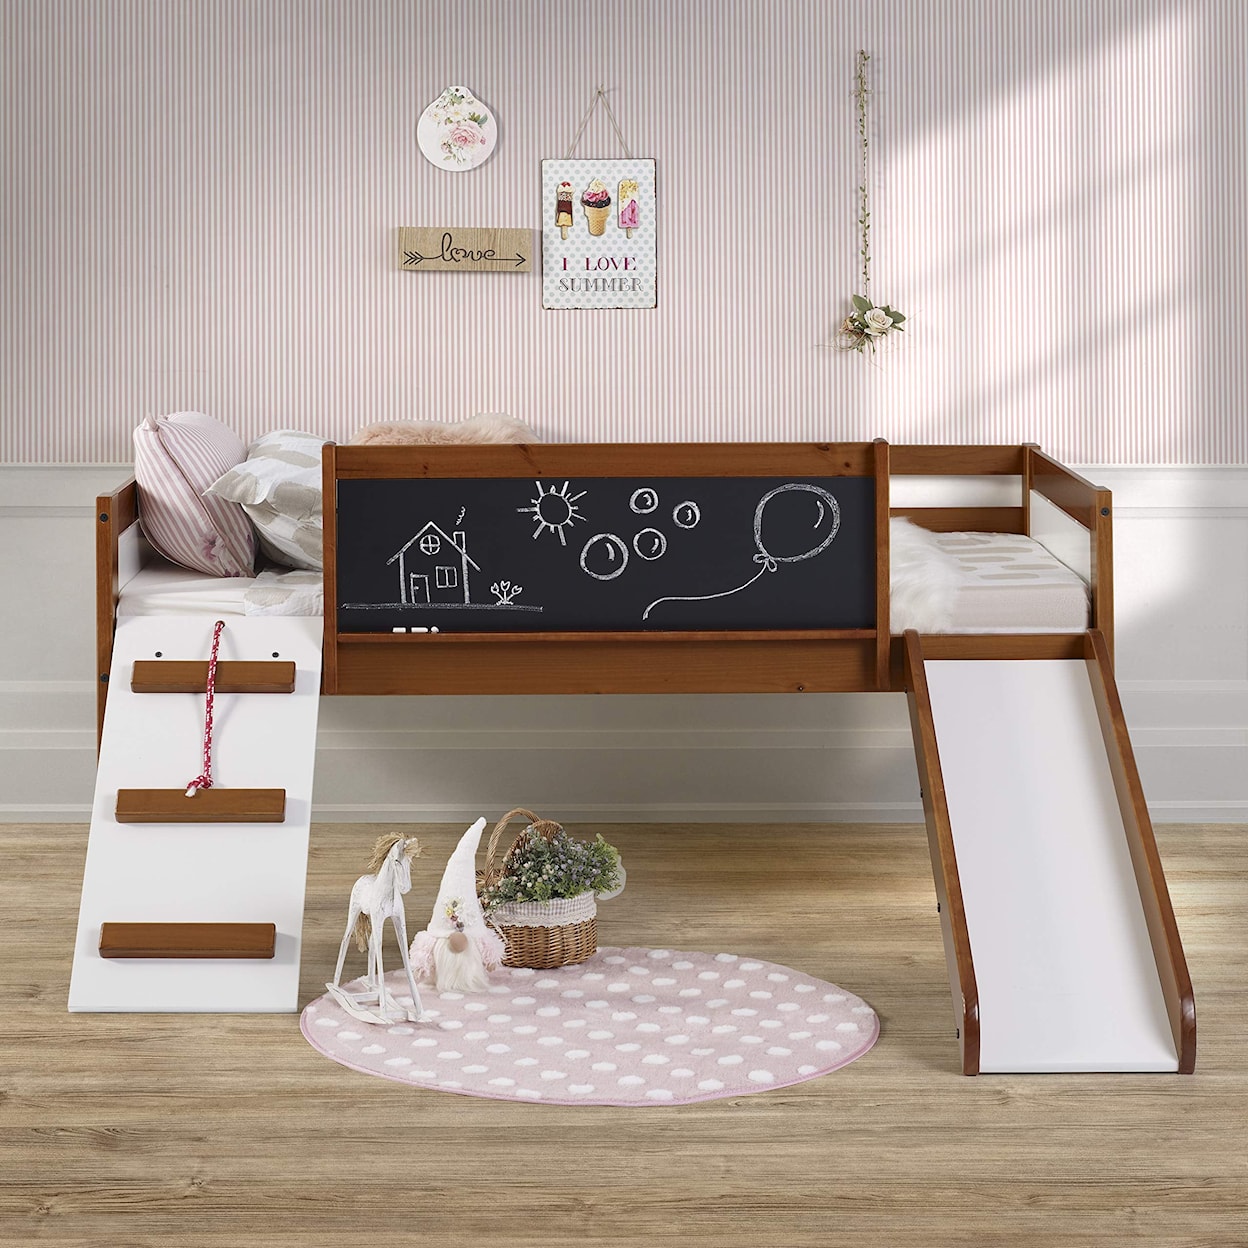 Donco Trading Co Bunkbeds ESPRESSO TWIN BED |